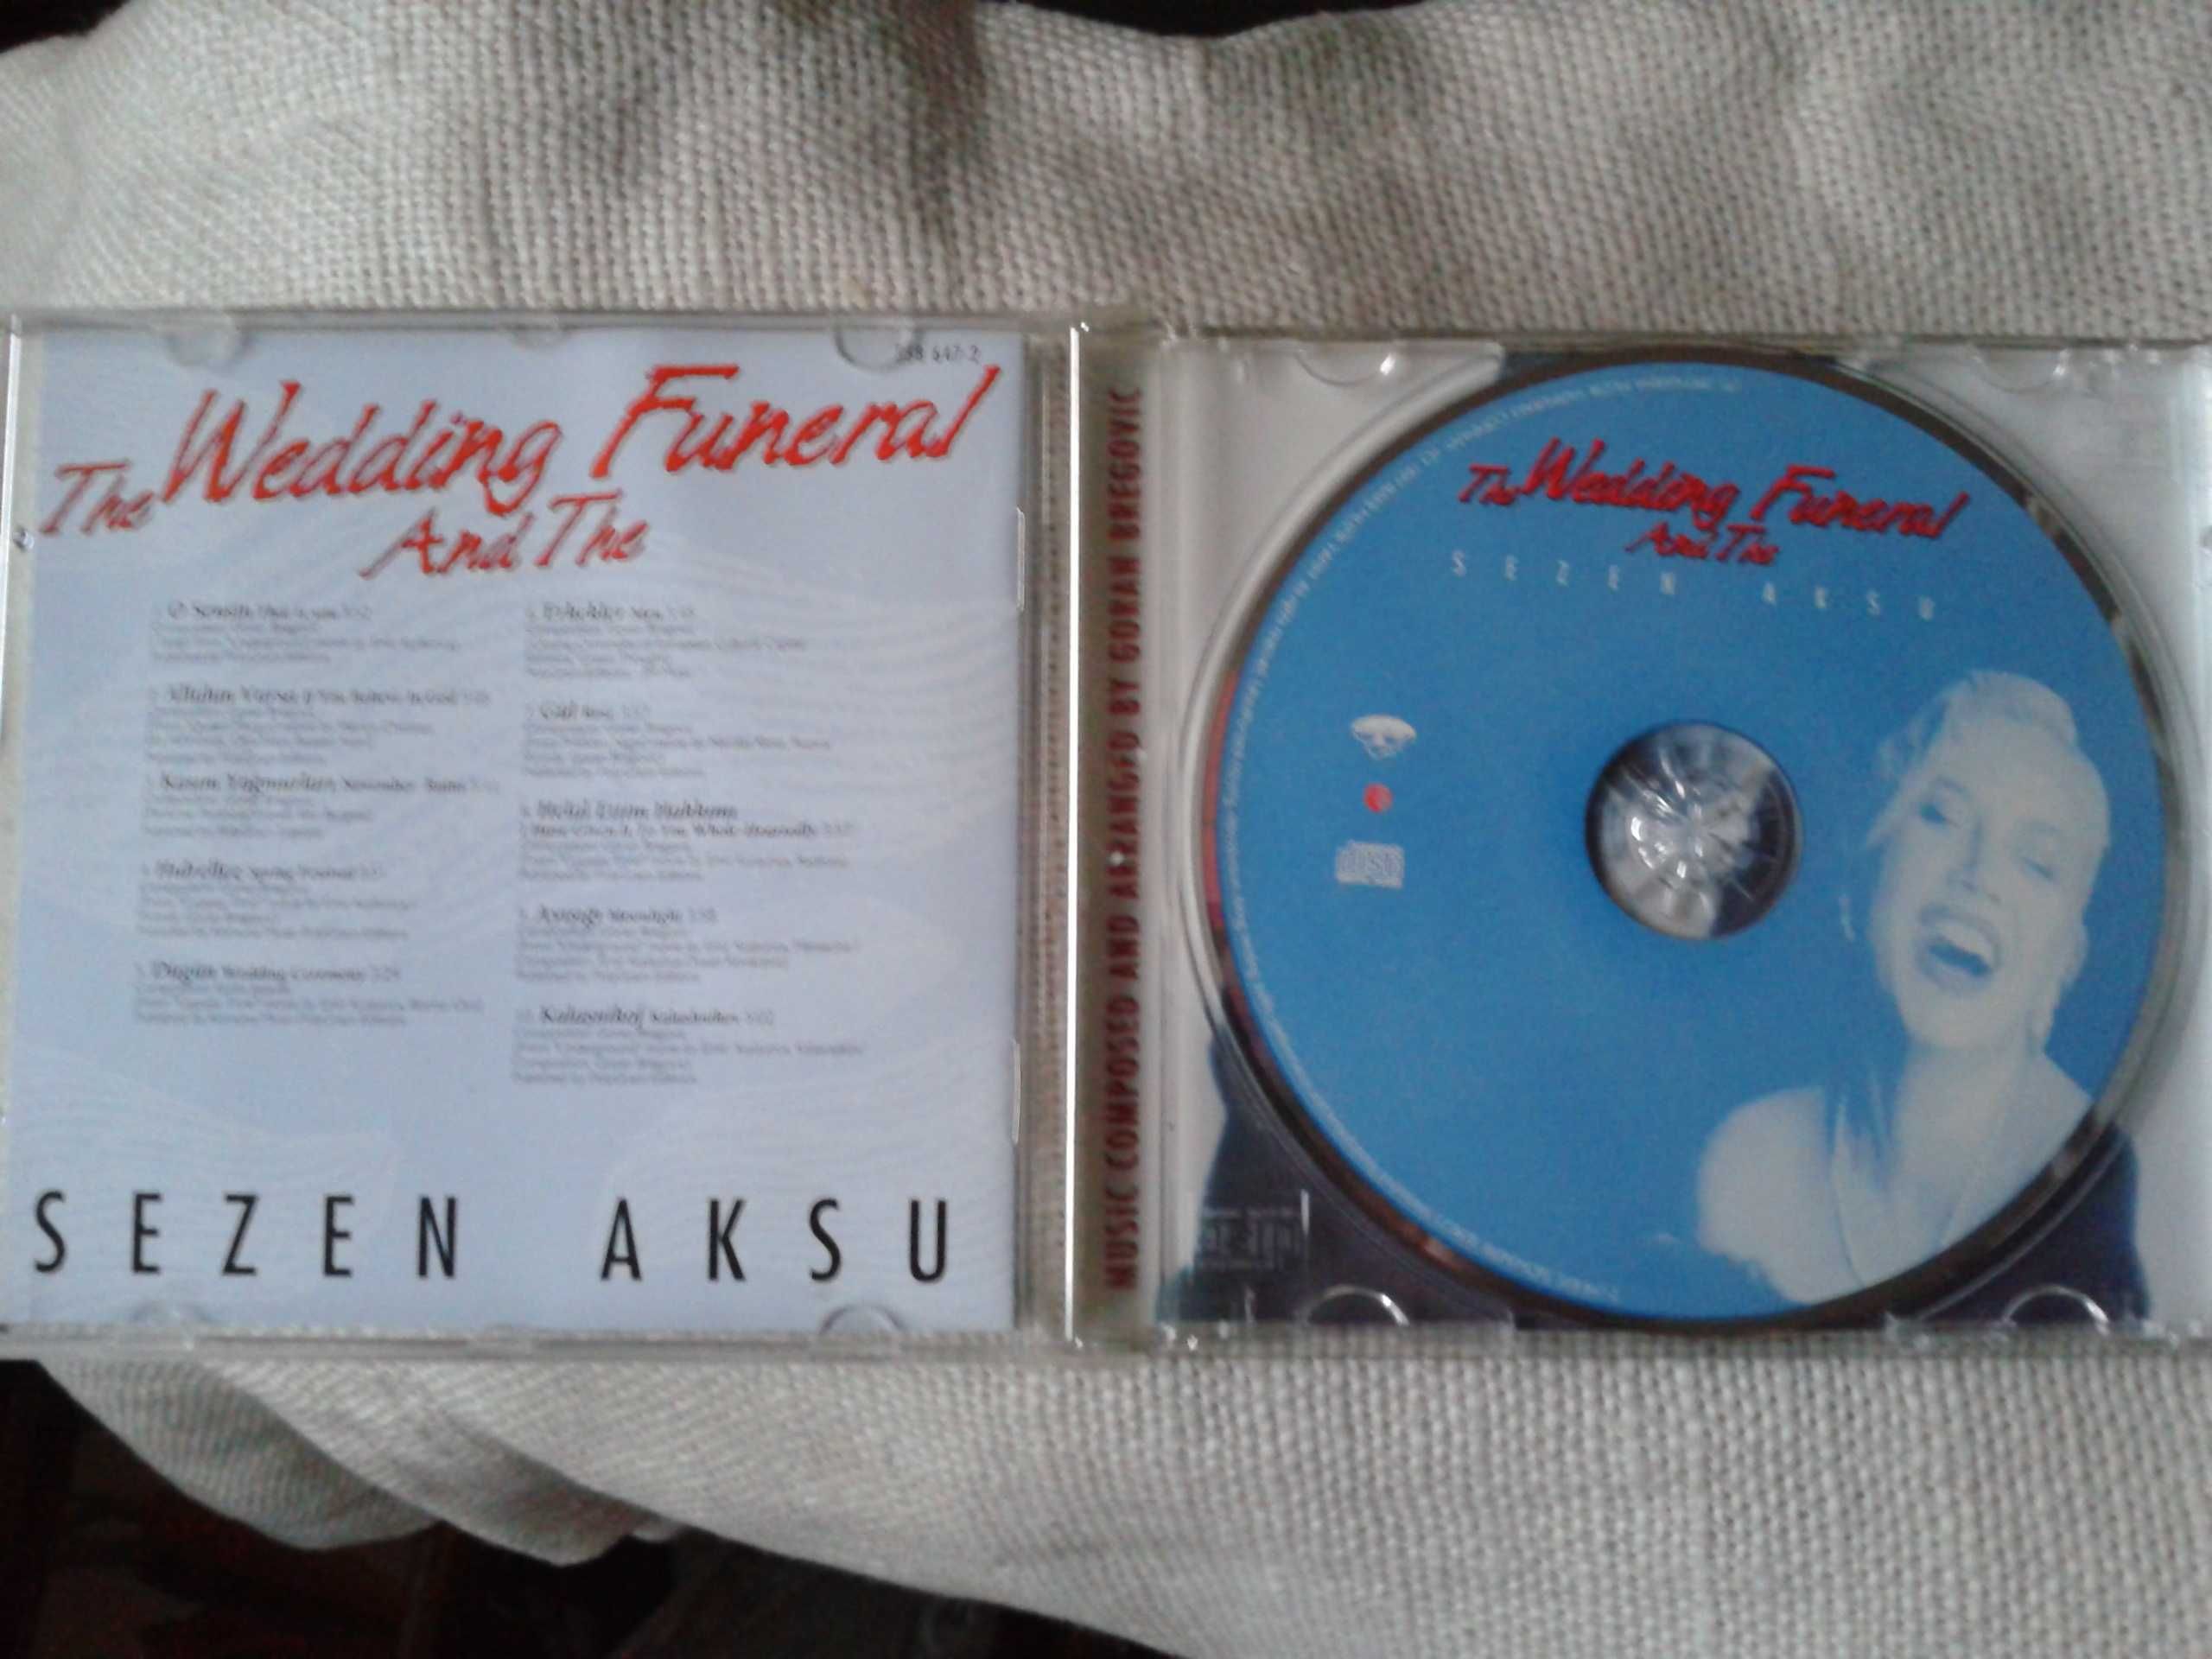 Sezen Aksu – The Wedding And The Funeral  CD